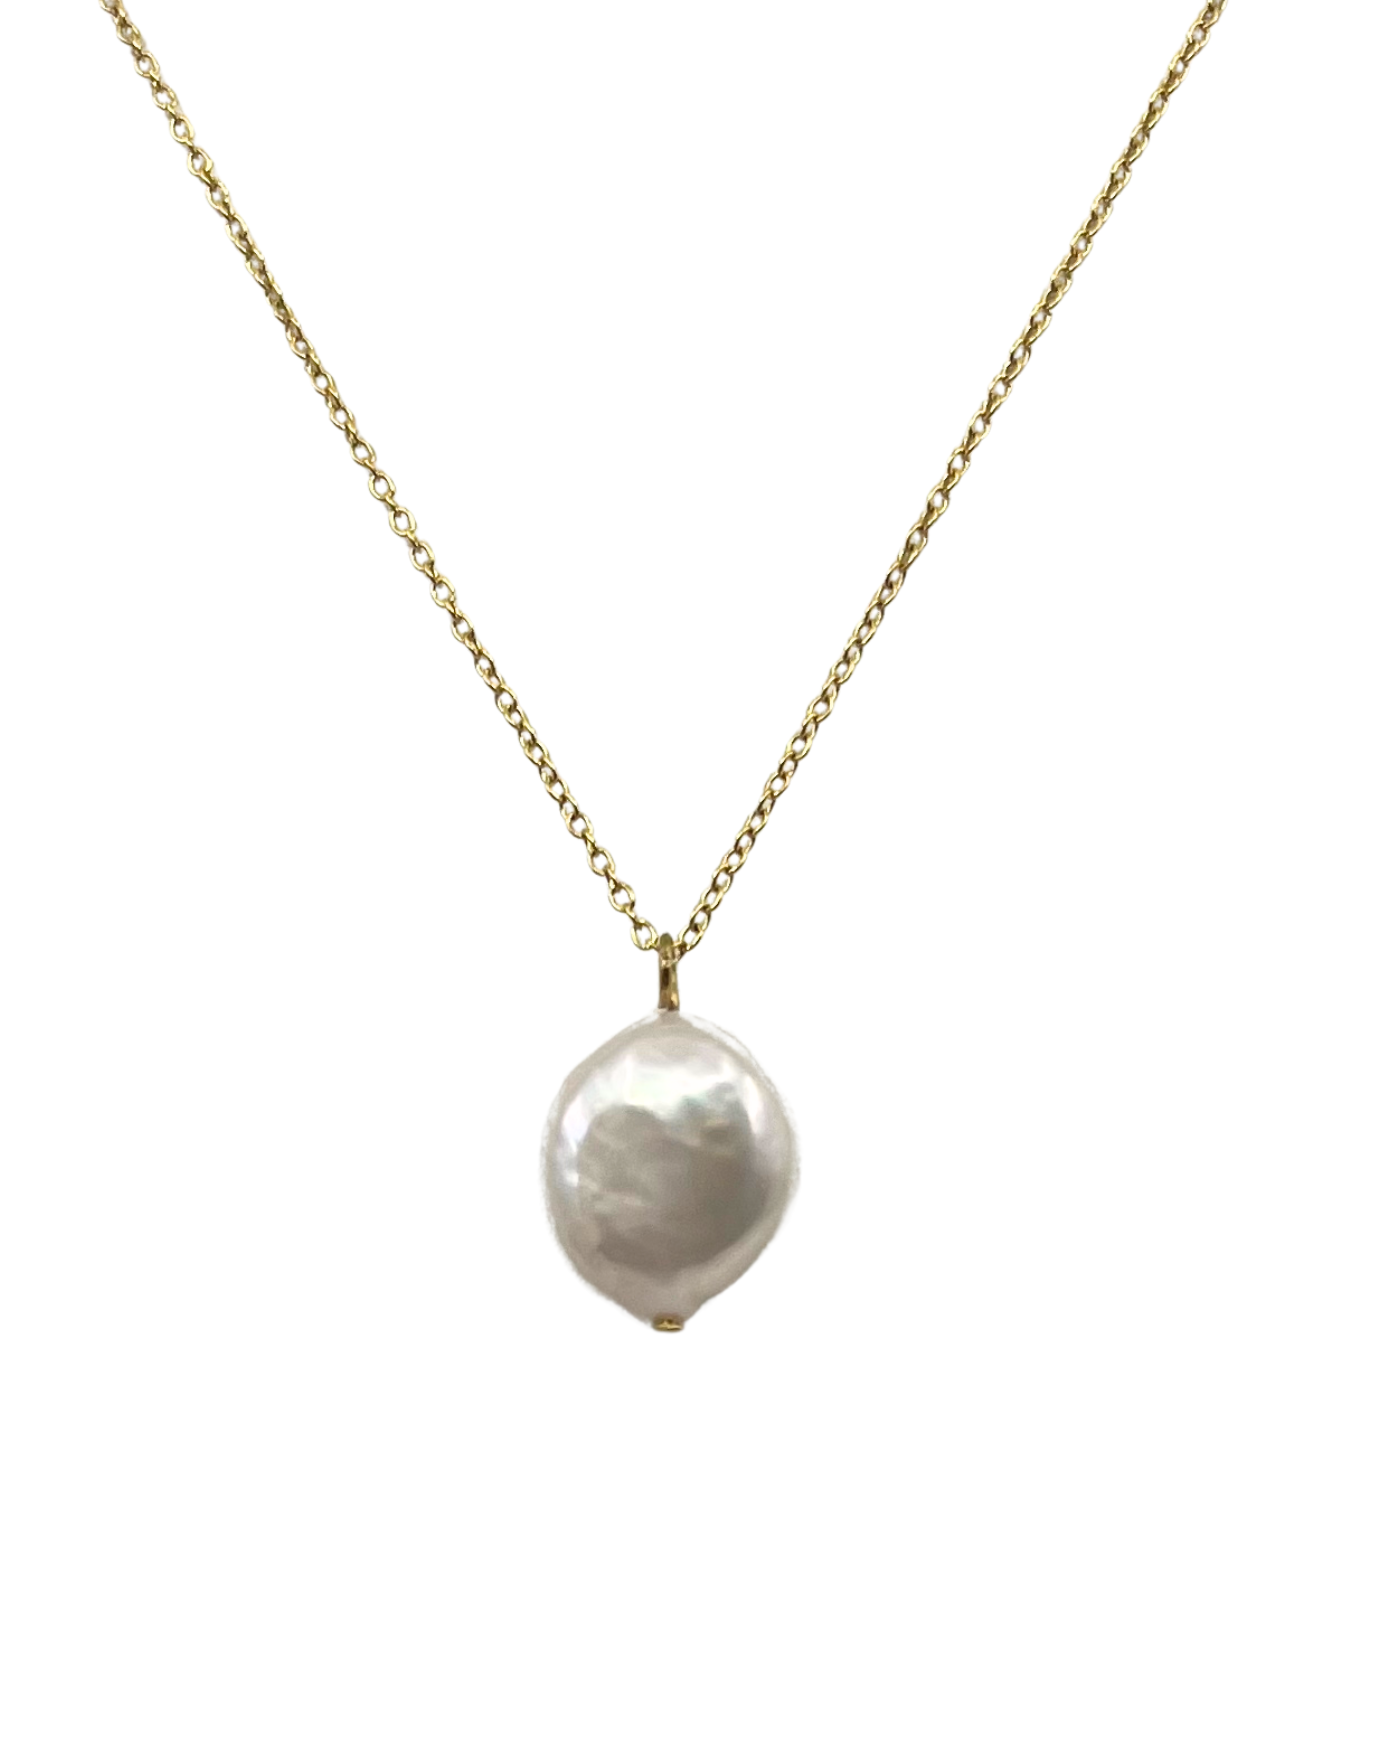 The Getting Fresh Disc Pearl Gold Necklace